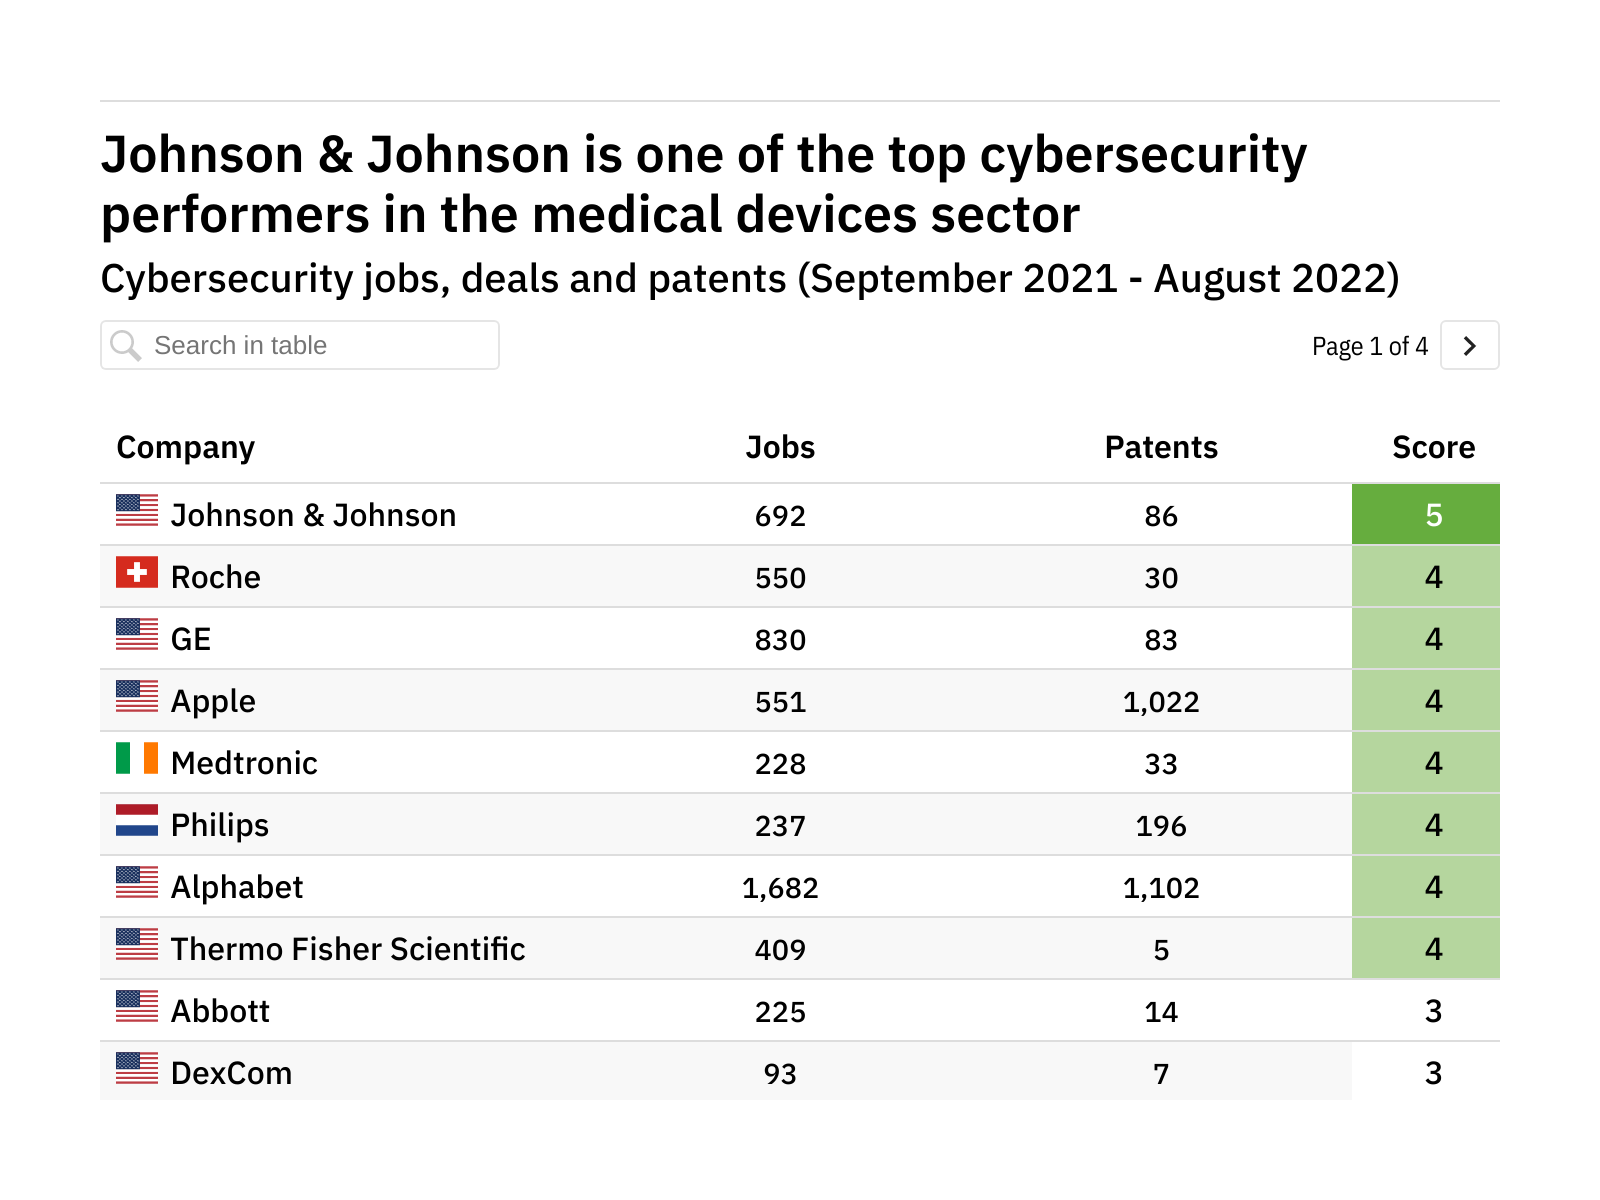 Revealed: The medical devices companies leading the way in cybersecurity